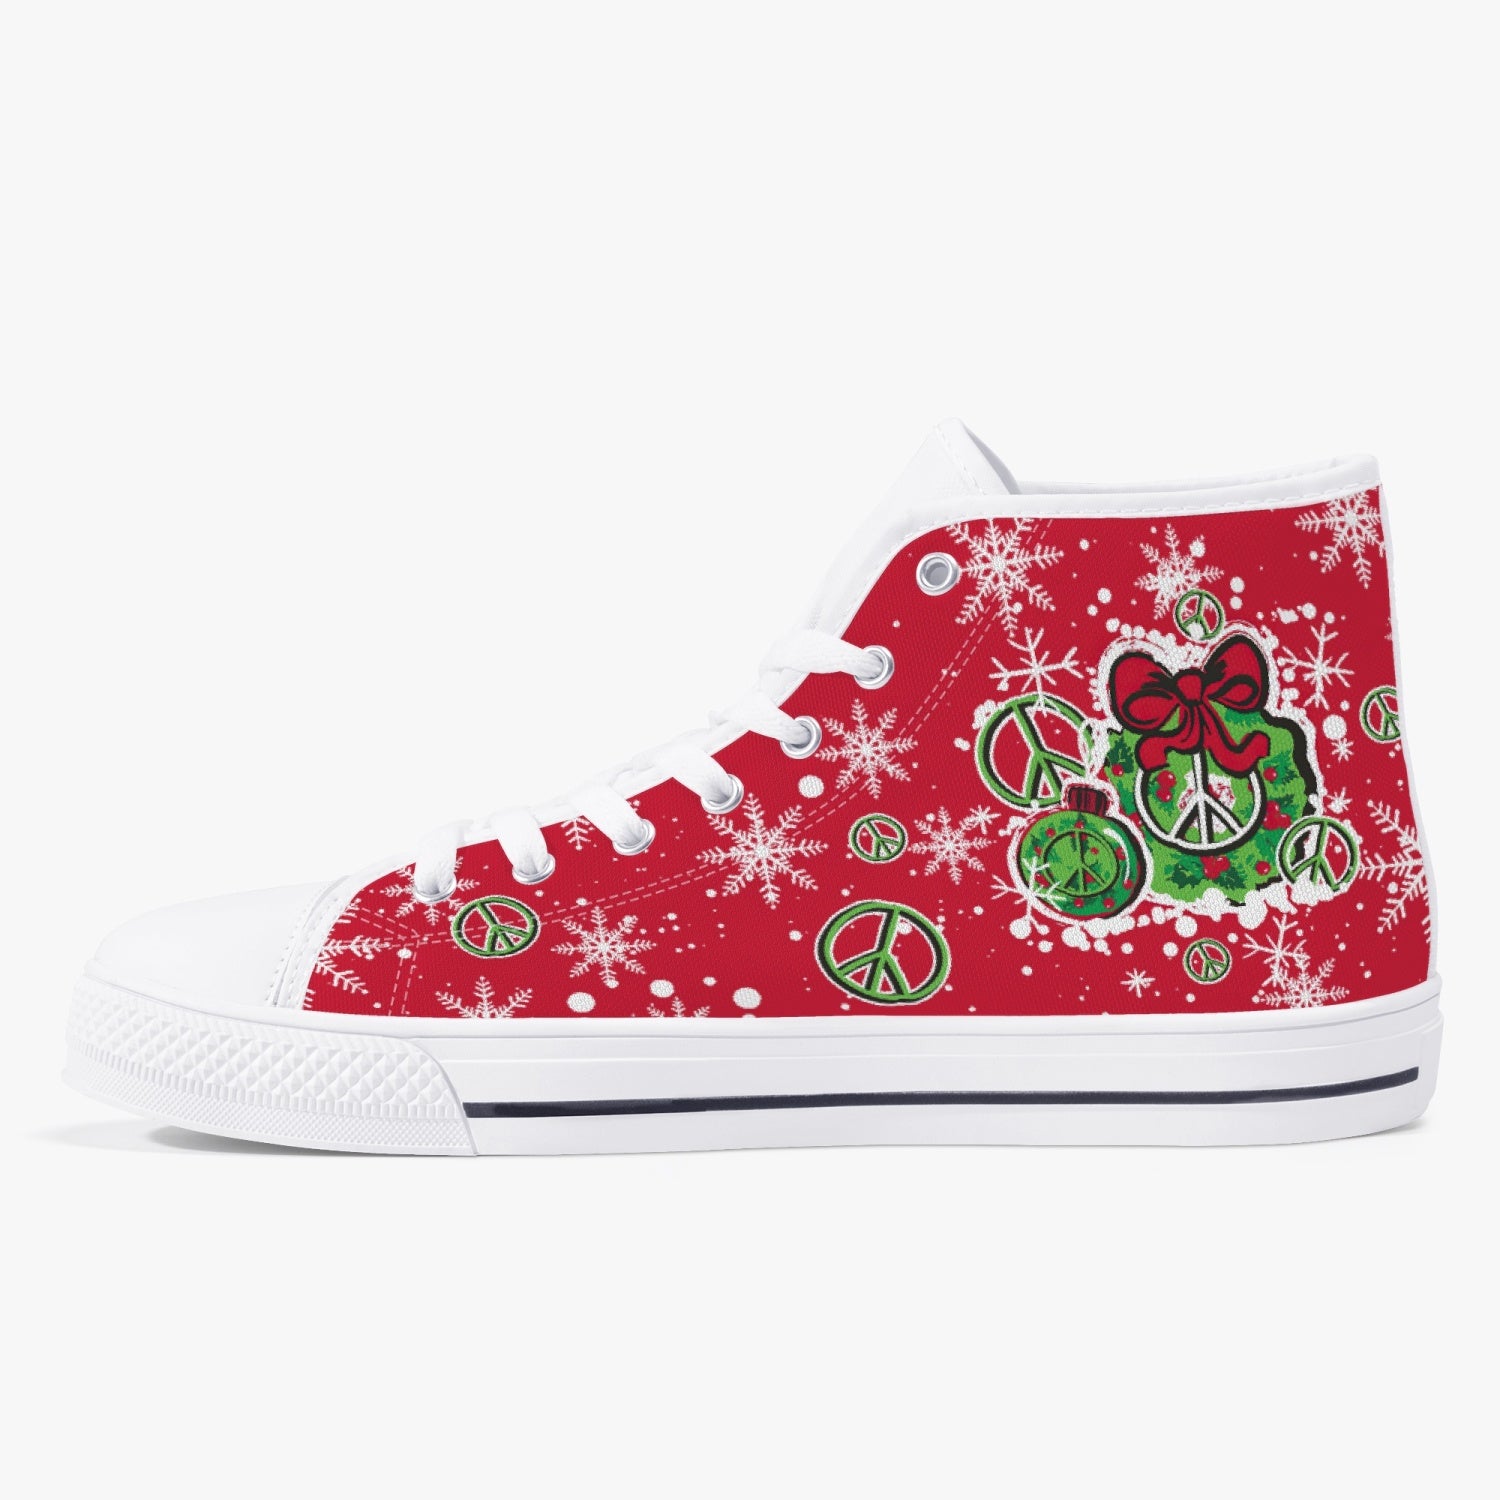 OH BY GOLLY CHRISTMAS HIGH TOP CANVAS SHOES - TY2710235